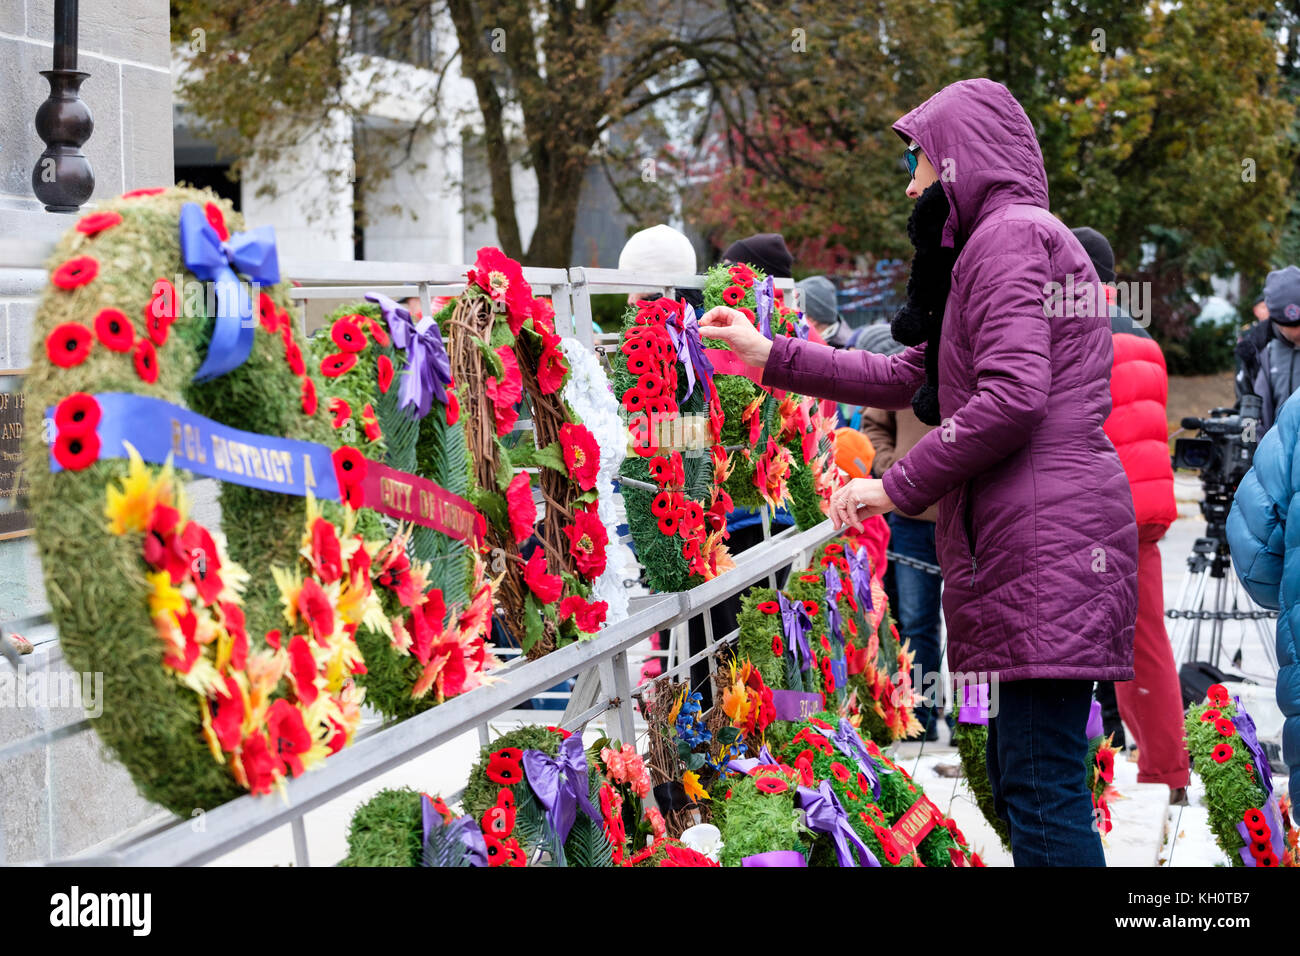 London, Ontario, Canada, 11th November 2017. Thousands of Londoners gathered at the restored cenotaph in downtown Victoria Park to mark Remembrance Day ceremonies, honouring military men and women. The event was marked by a parade and the presence of many veterans that fought in previous wars. The city’s cenotaph was rededicated in September after a $475,000 restoration. Credit: Rubens Alarcon/Alamy Live News Stock Photo